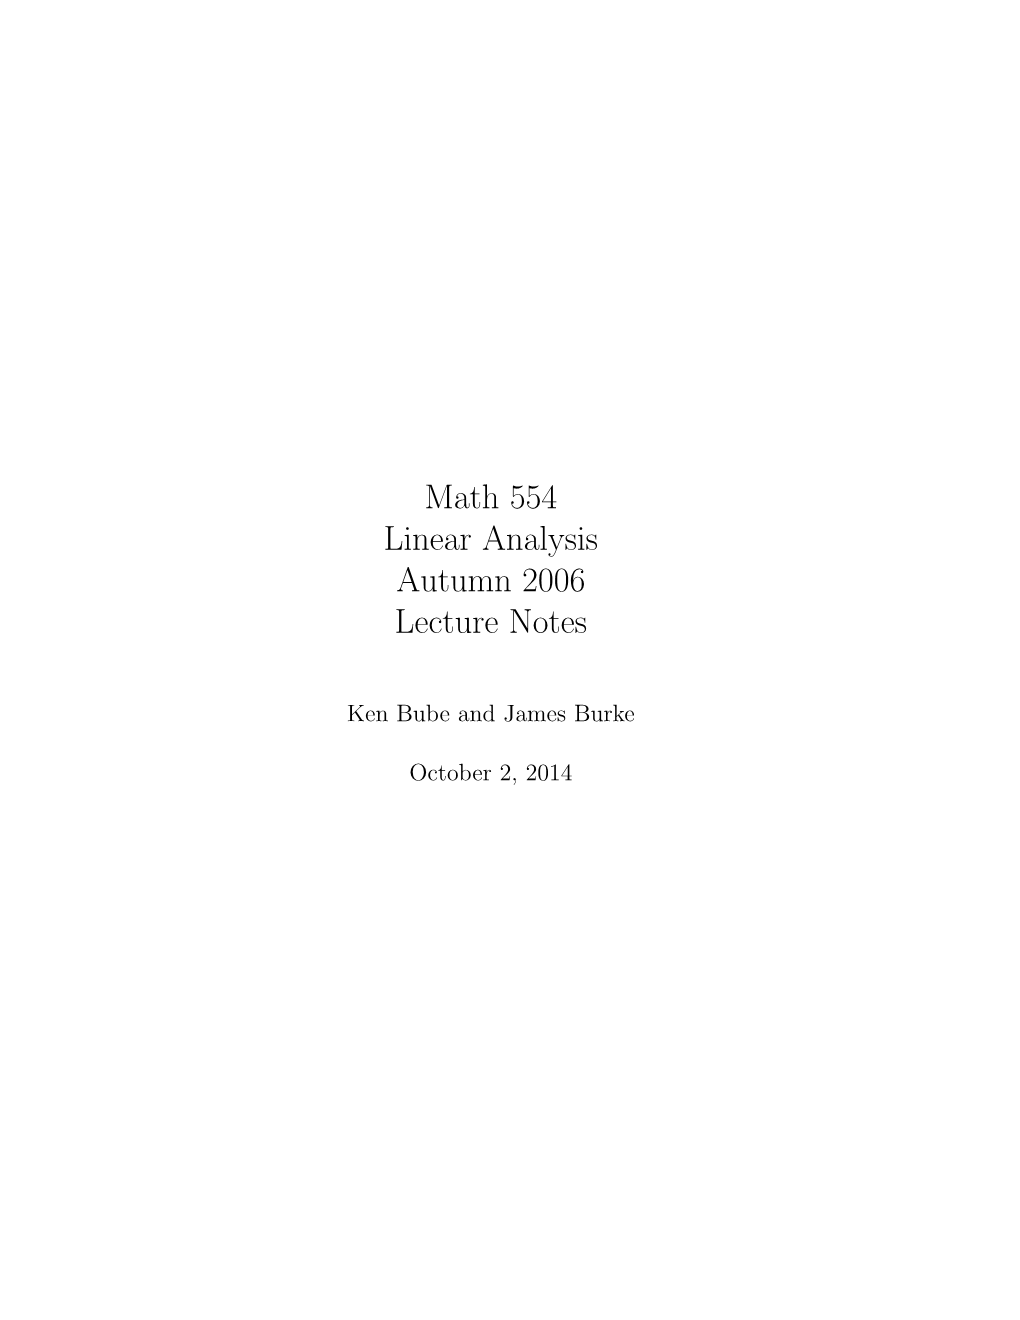 Math 554 Linear Analysis Autumn 2006 Lecture Notes